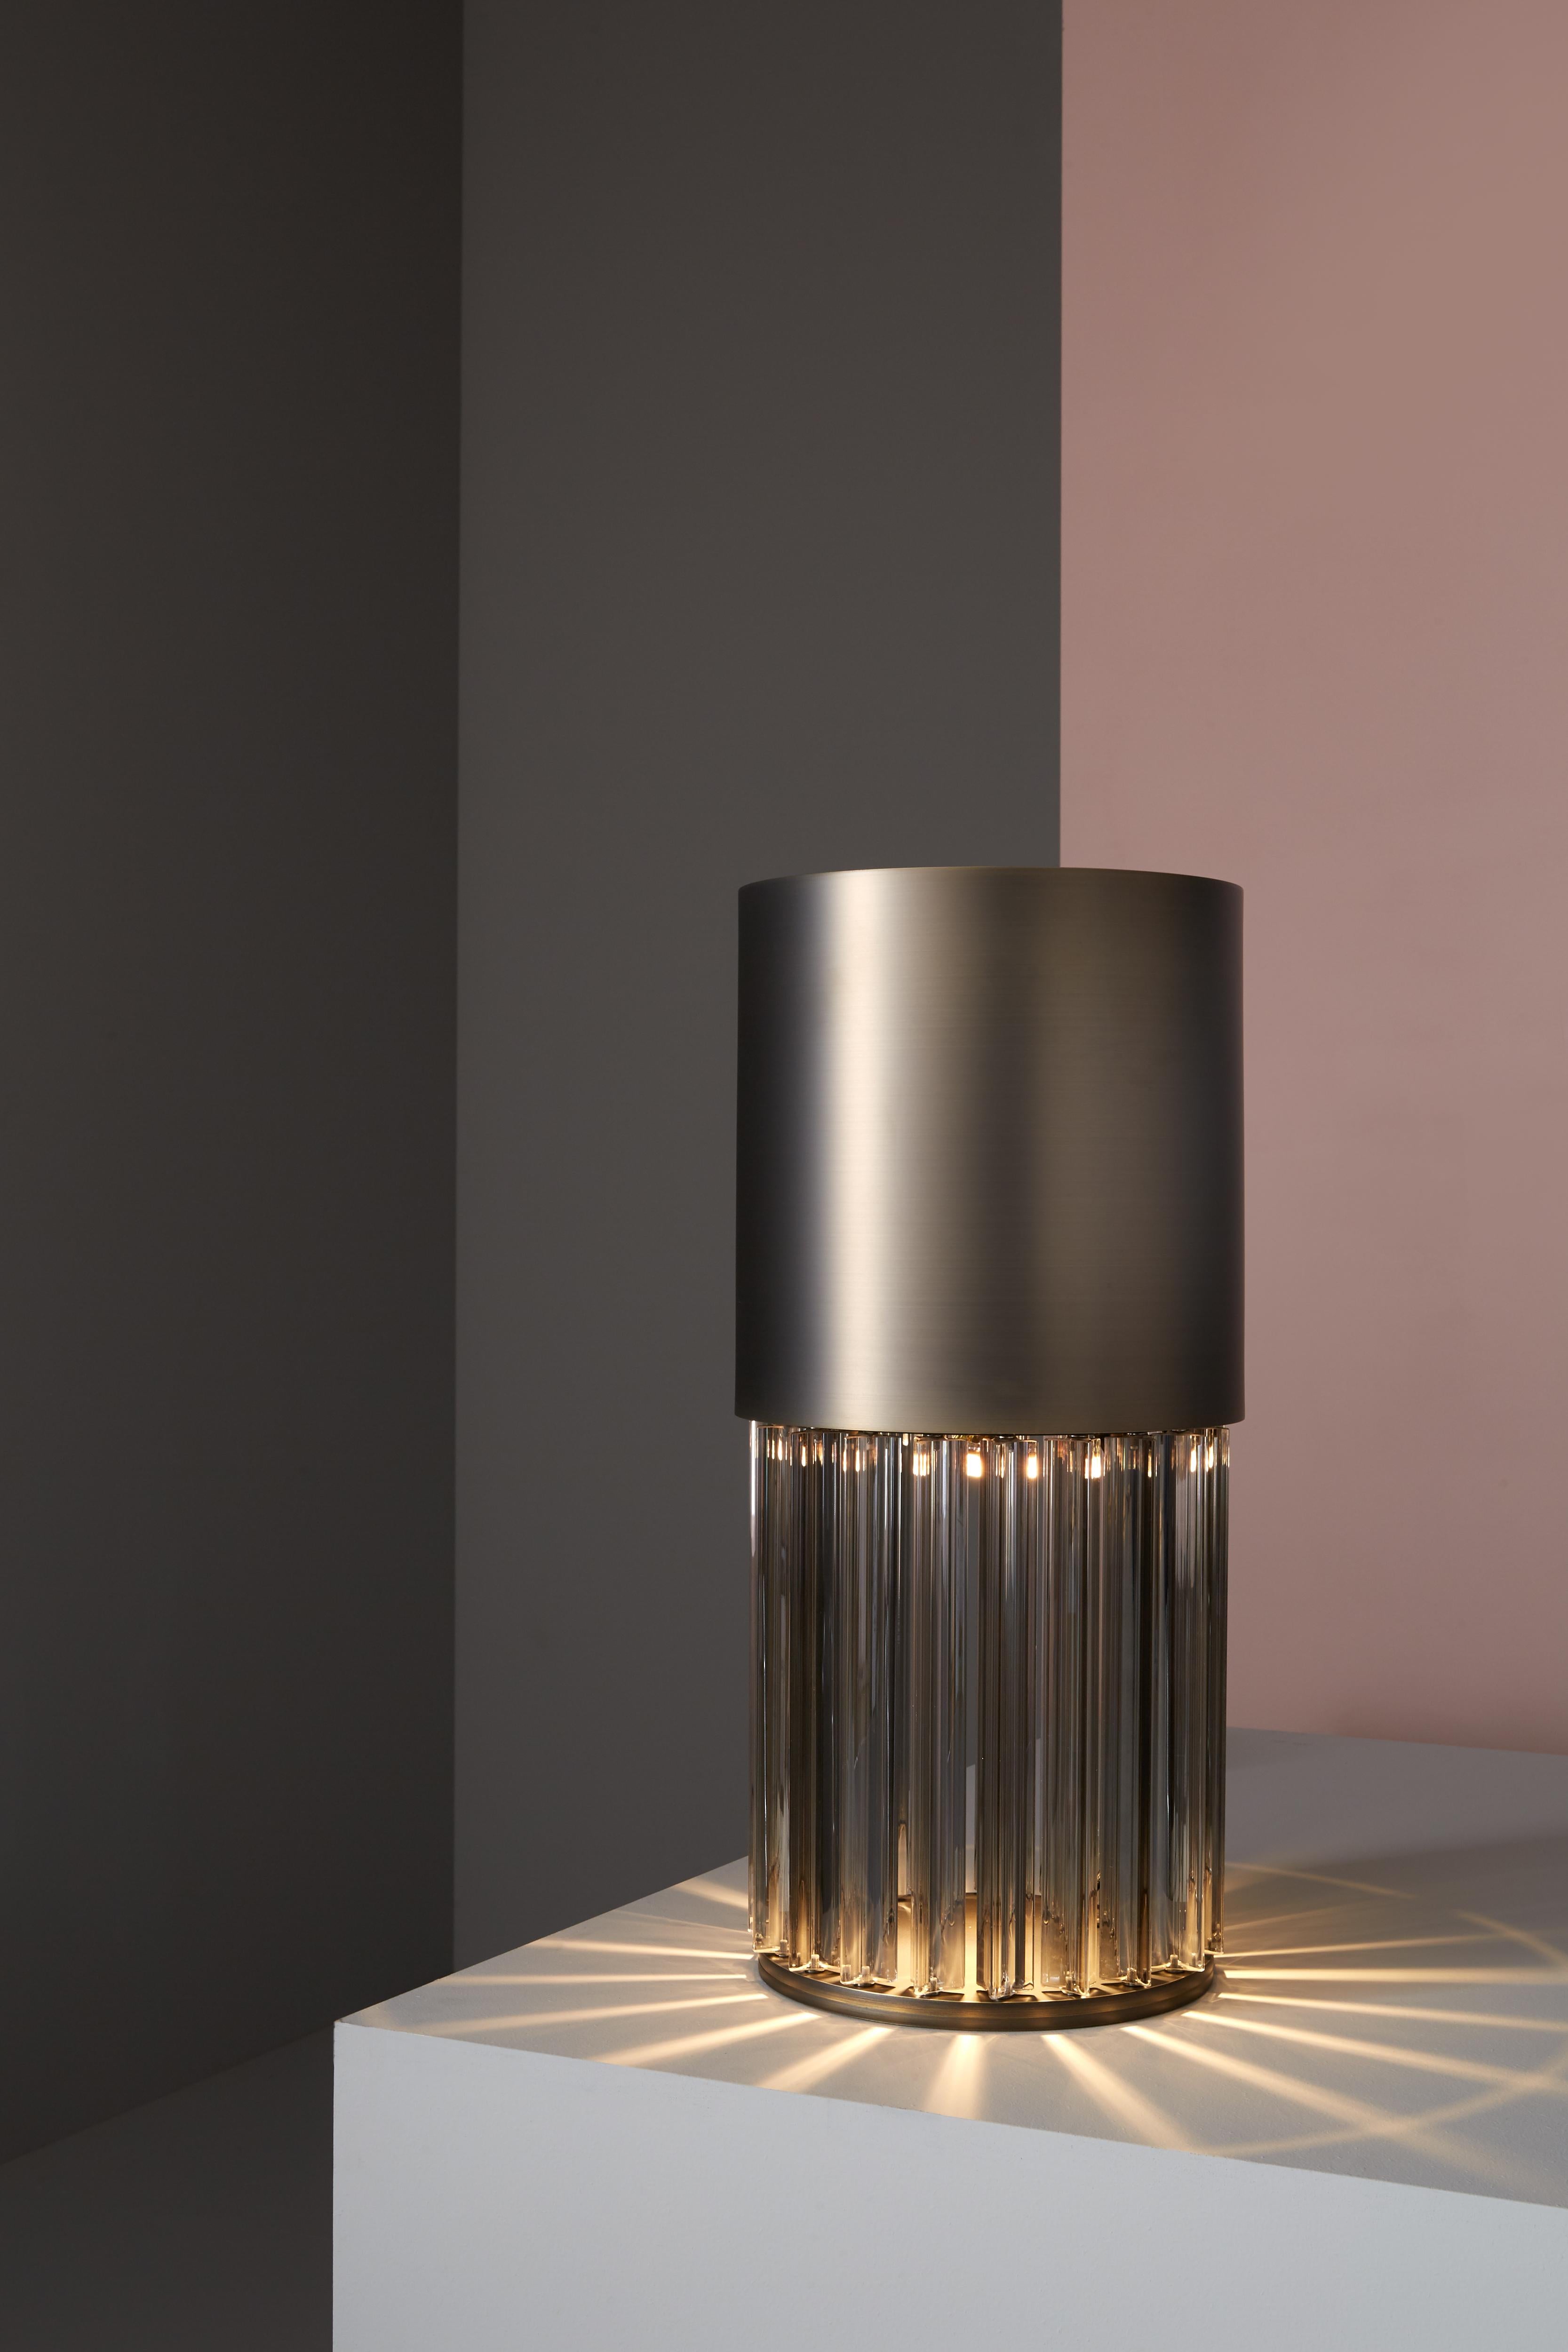 Table lamp with diffused light. Dark bronze striped structure and crystal, amber or smoke grey Murano blown glass trihedrons.
Specifications:
Function: Table
Location: Interior
Light emission: Diffused light
Light source: 1×4W GU10 PAR16 LED